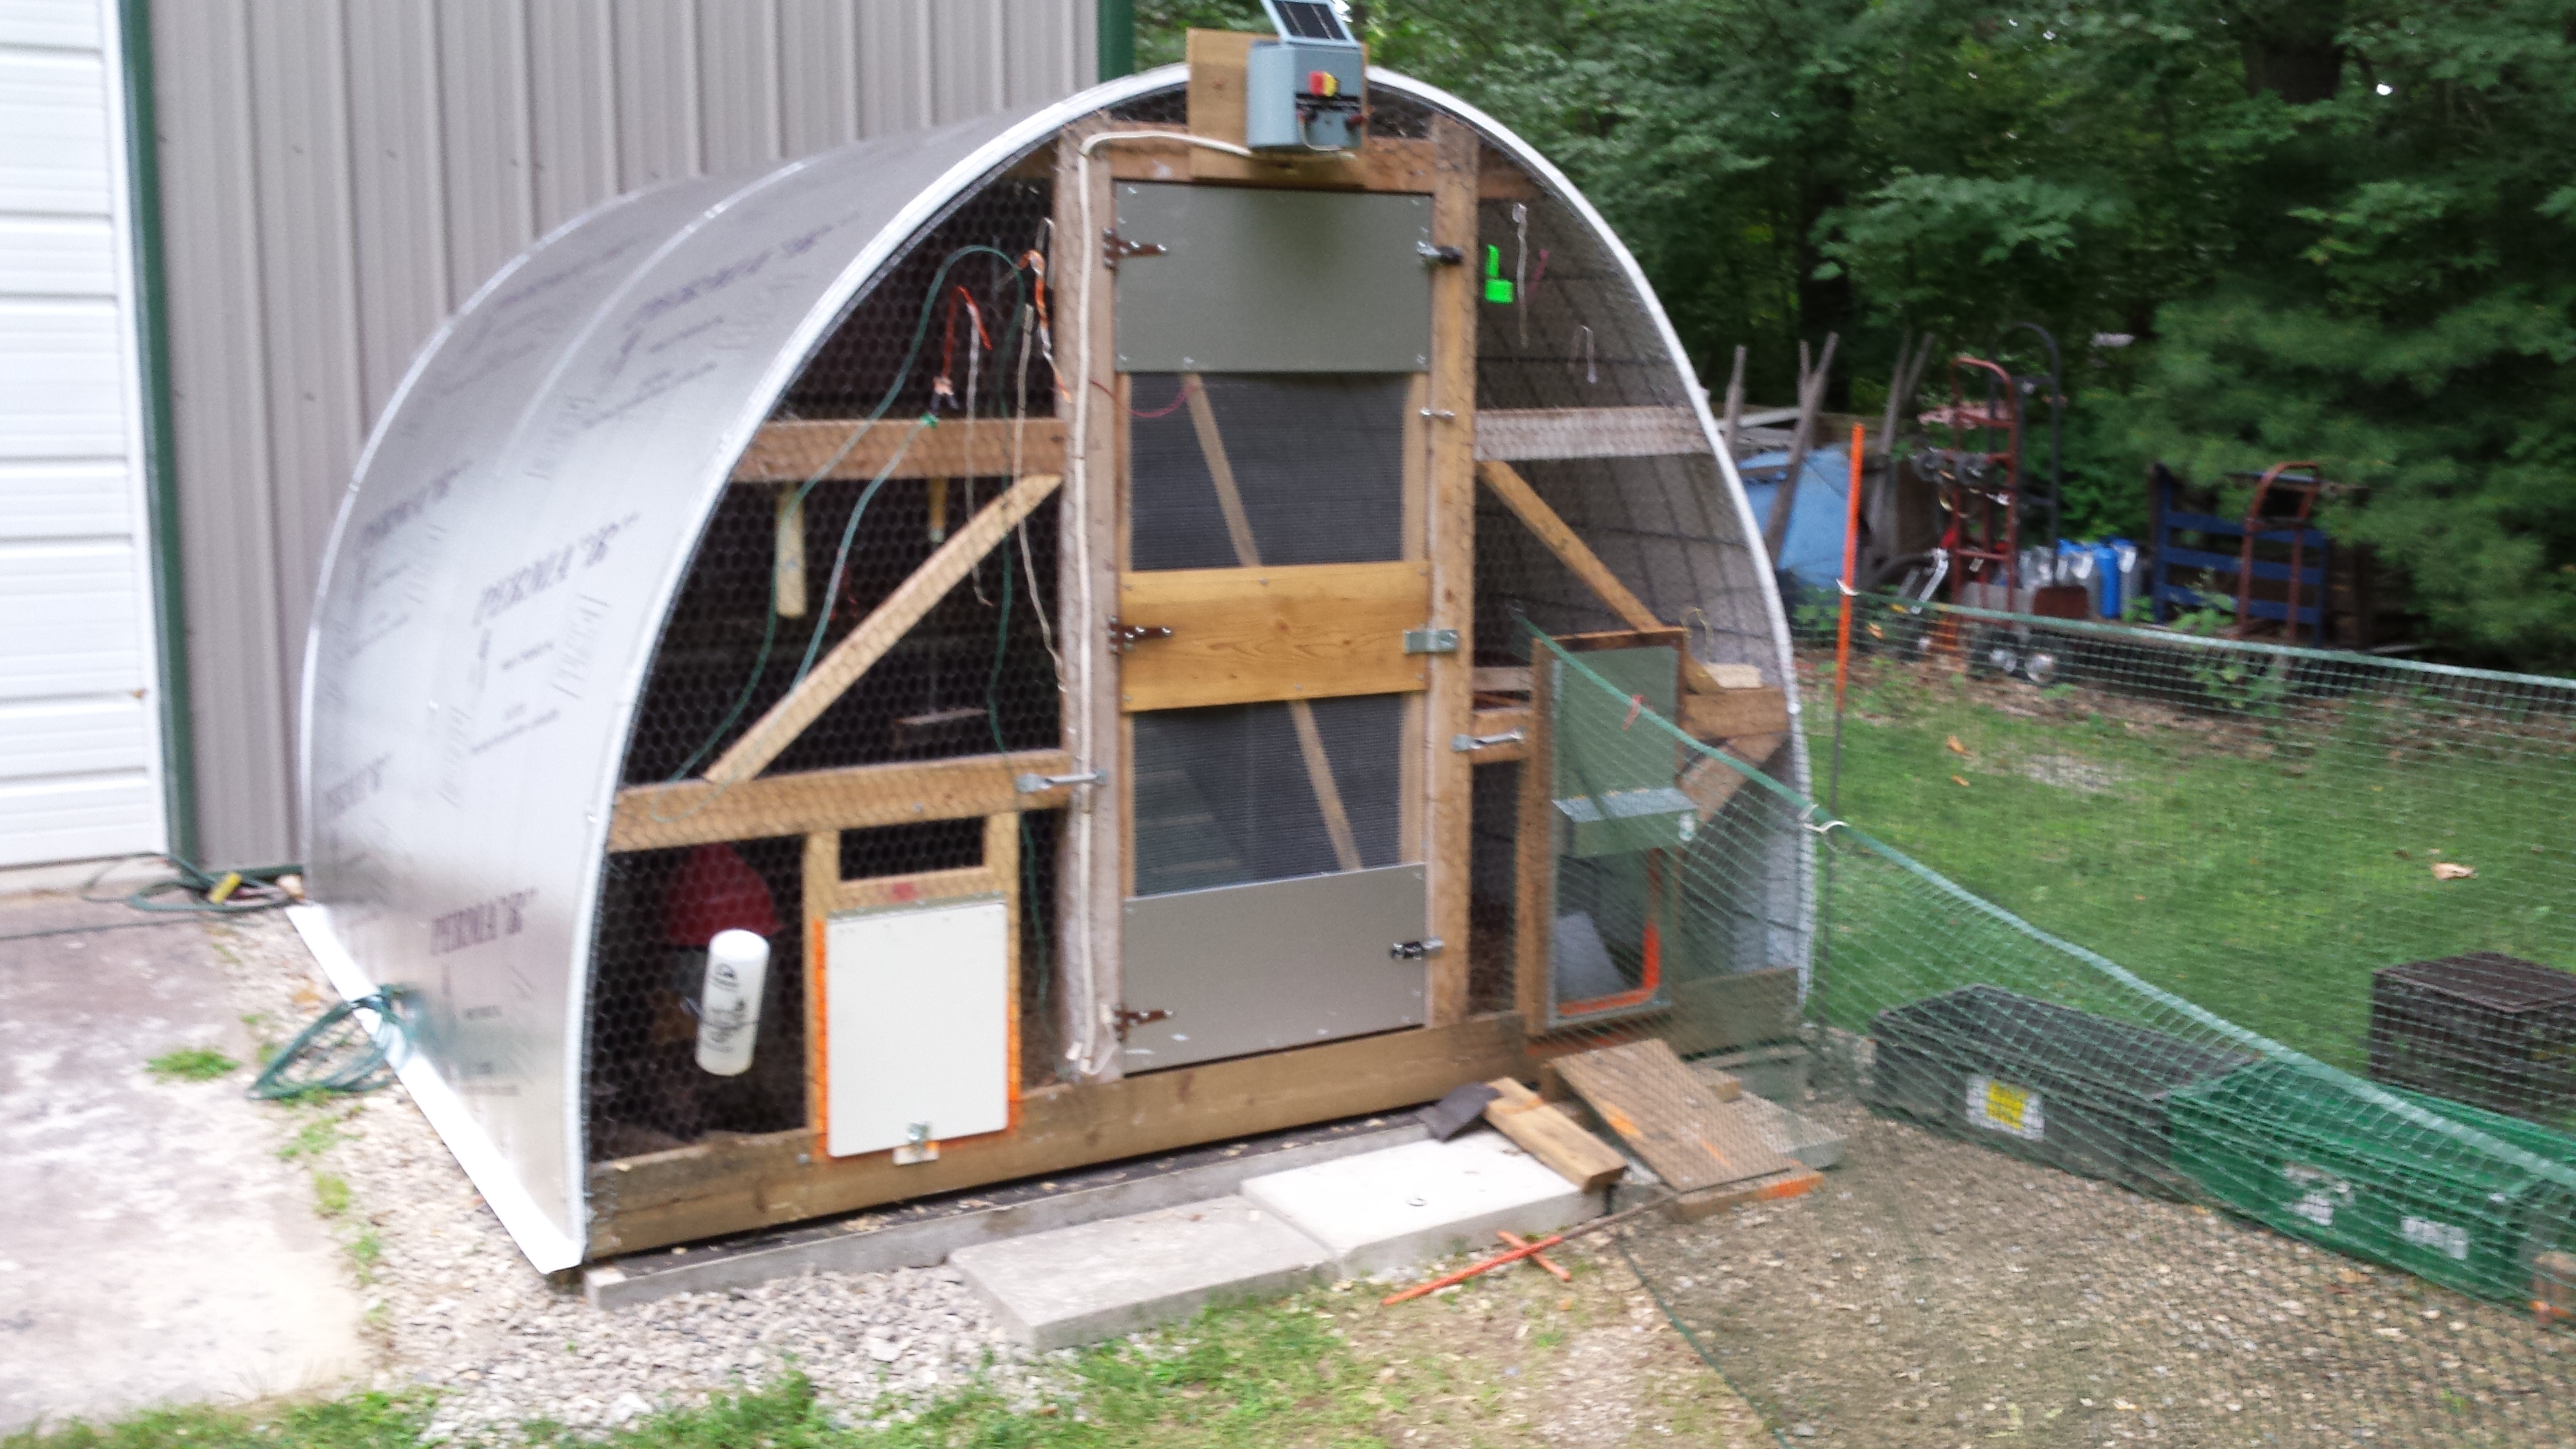 cattle panel, insulated, concrete floored hoop house for 15 hens